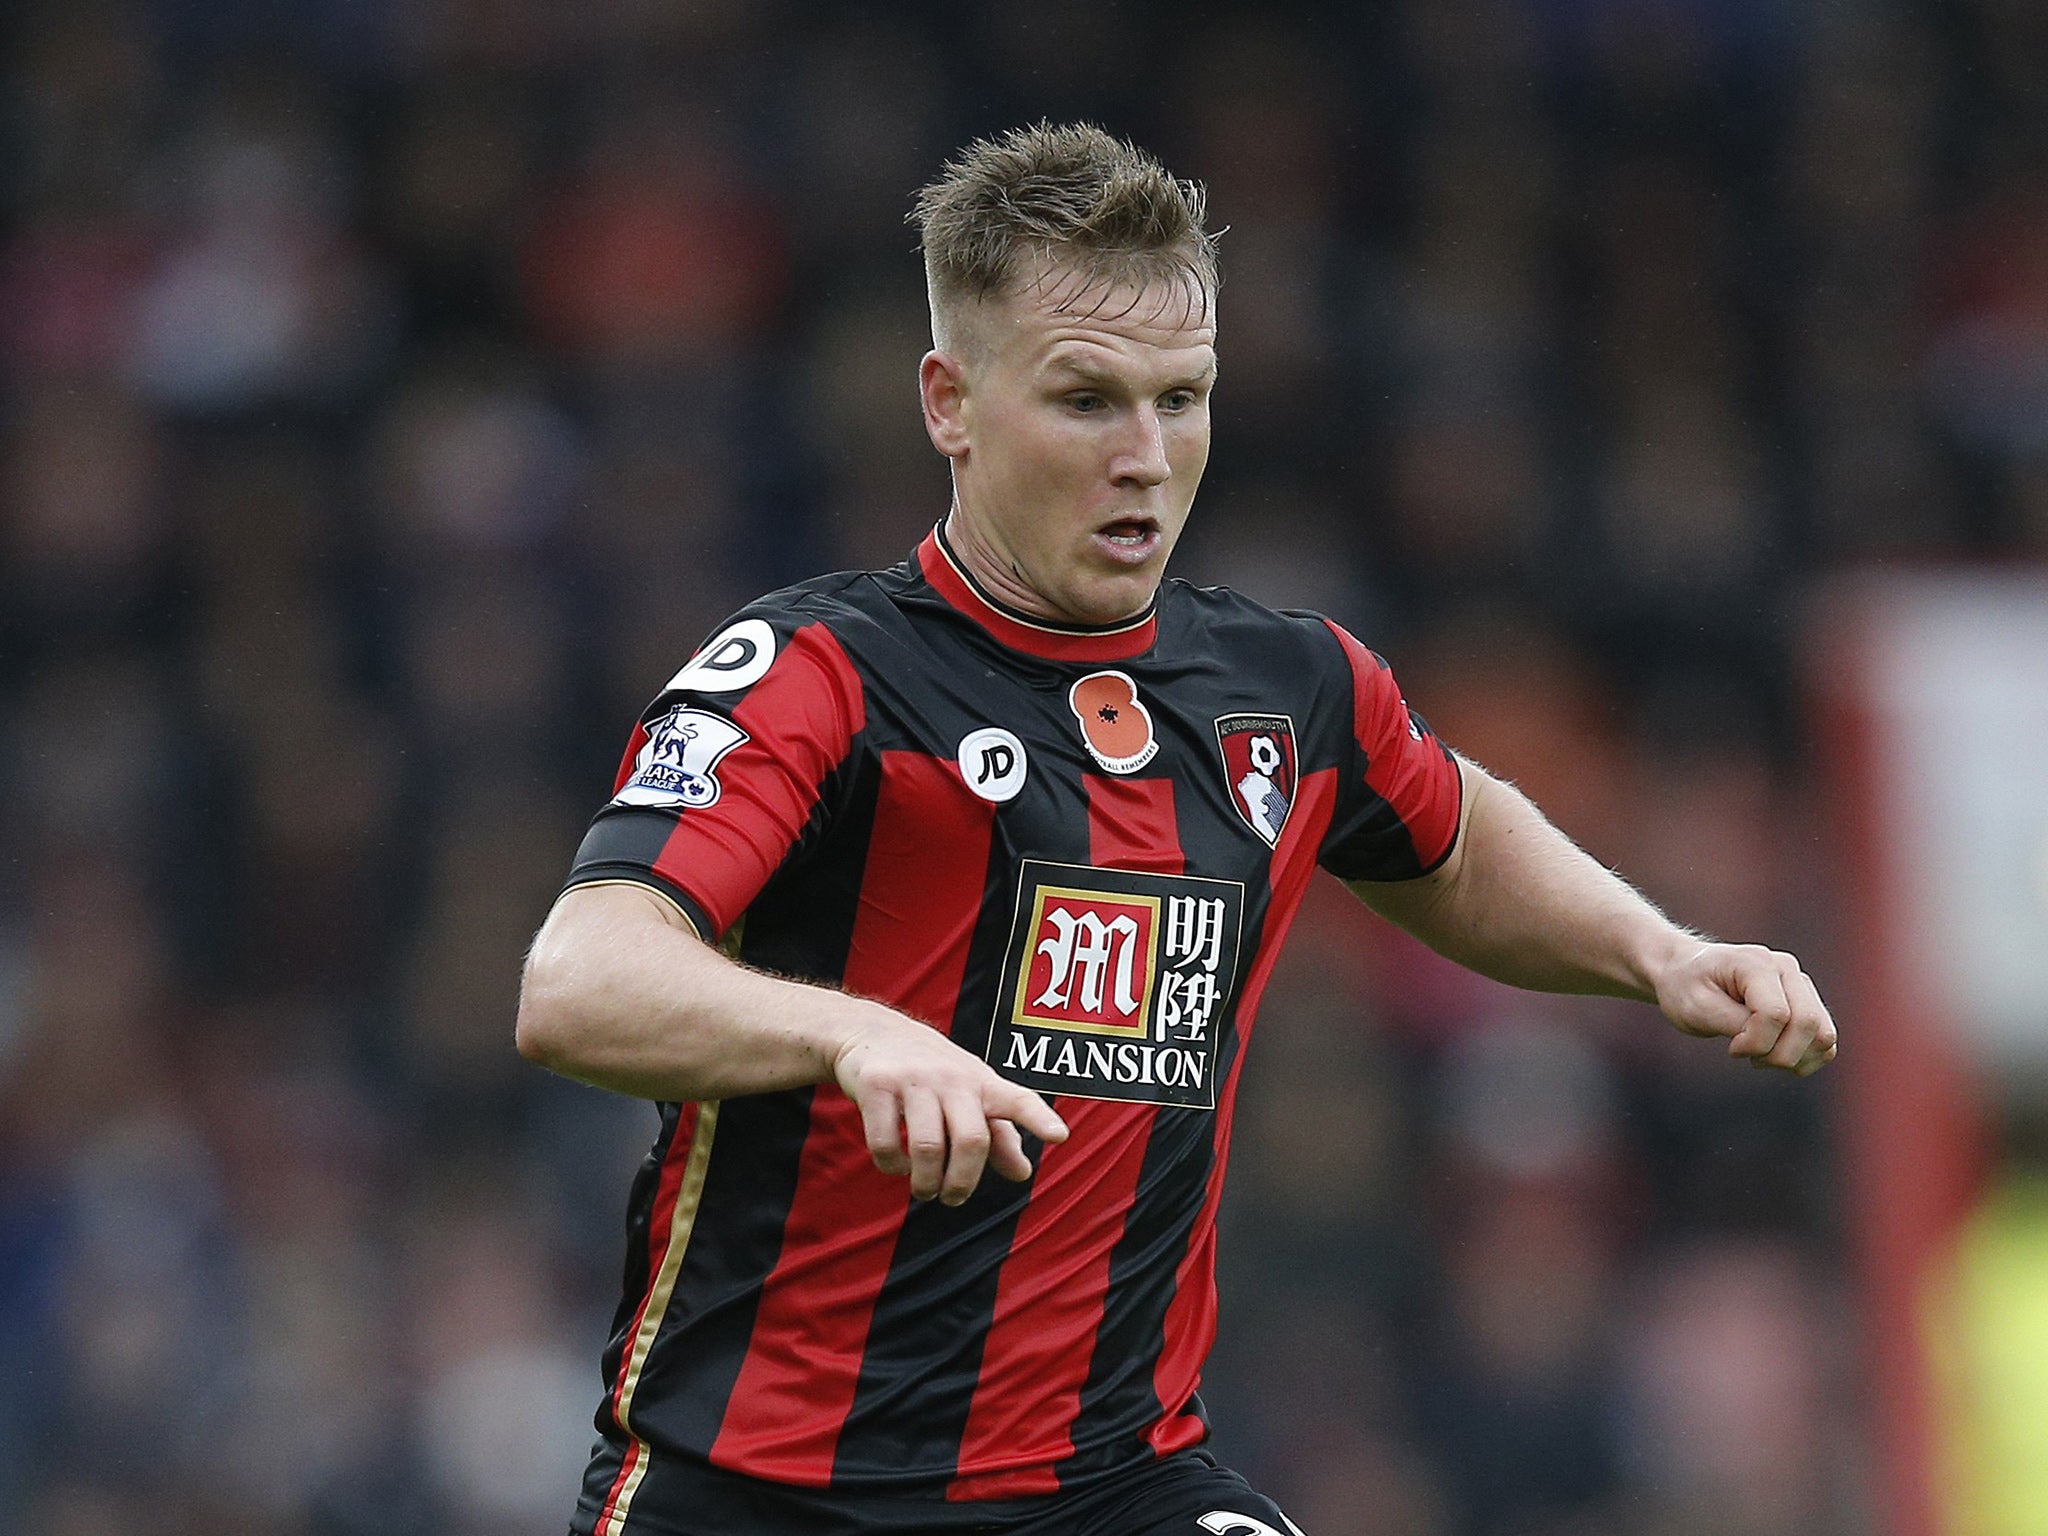 Bournemouth's Matt Ritchie attempted to bring his side back into the game